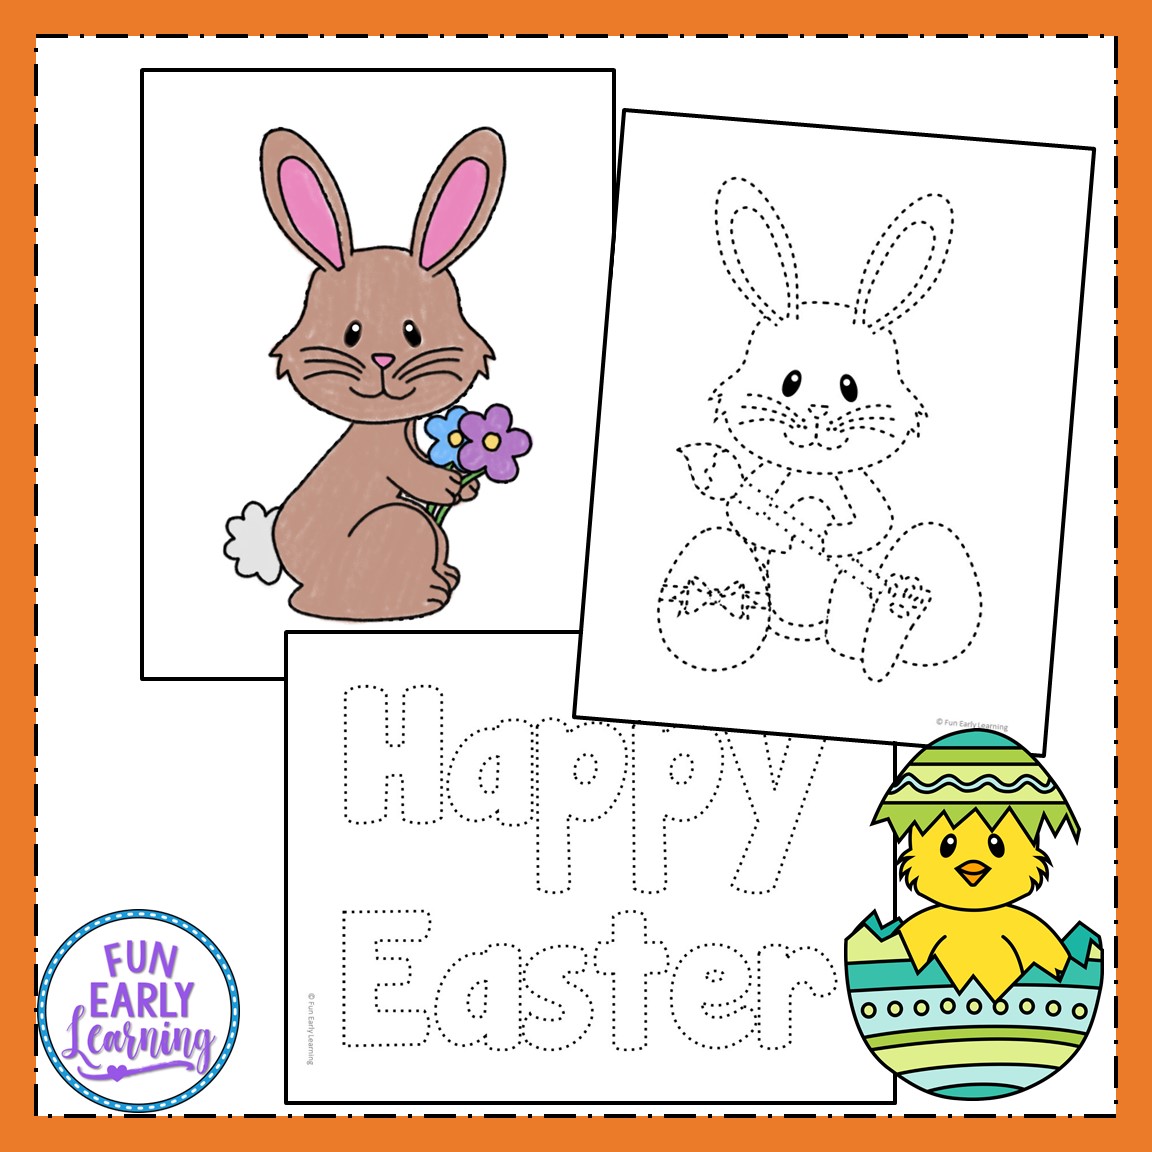 https://www.funearlylearning.com/wp-content/uploads/2020/03/easter-coloring-pages-preview3.jpg